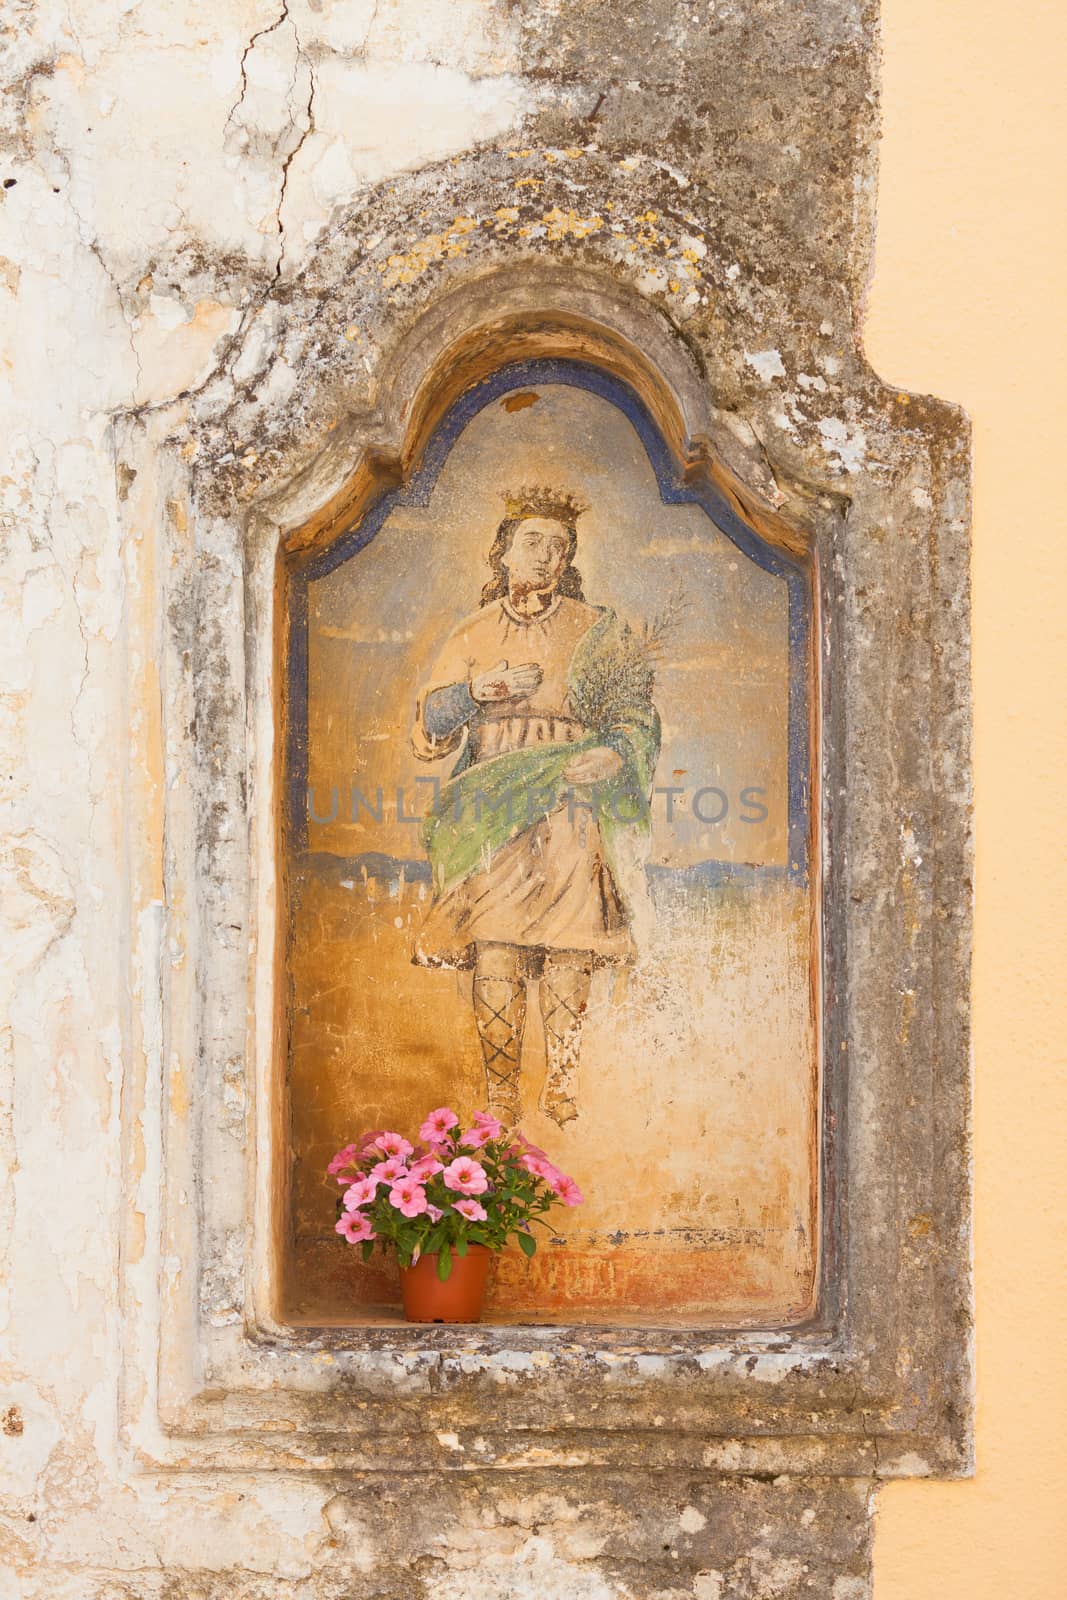 Presicce, Apulia - An old religious wall painting in the streets by tagstiles.com